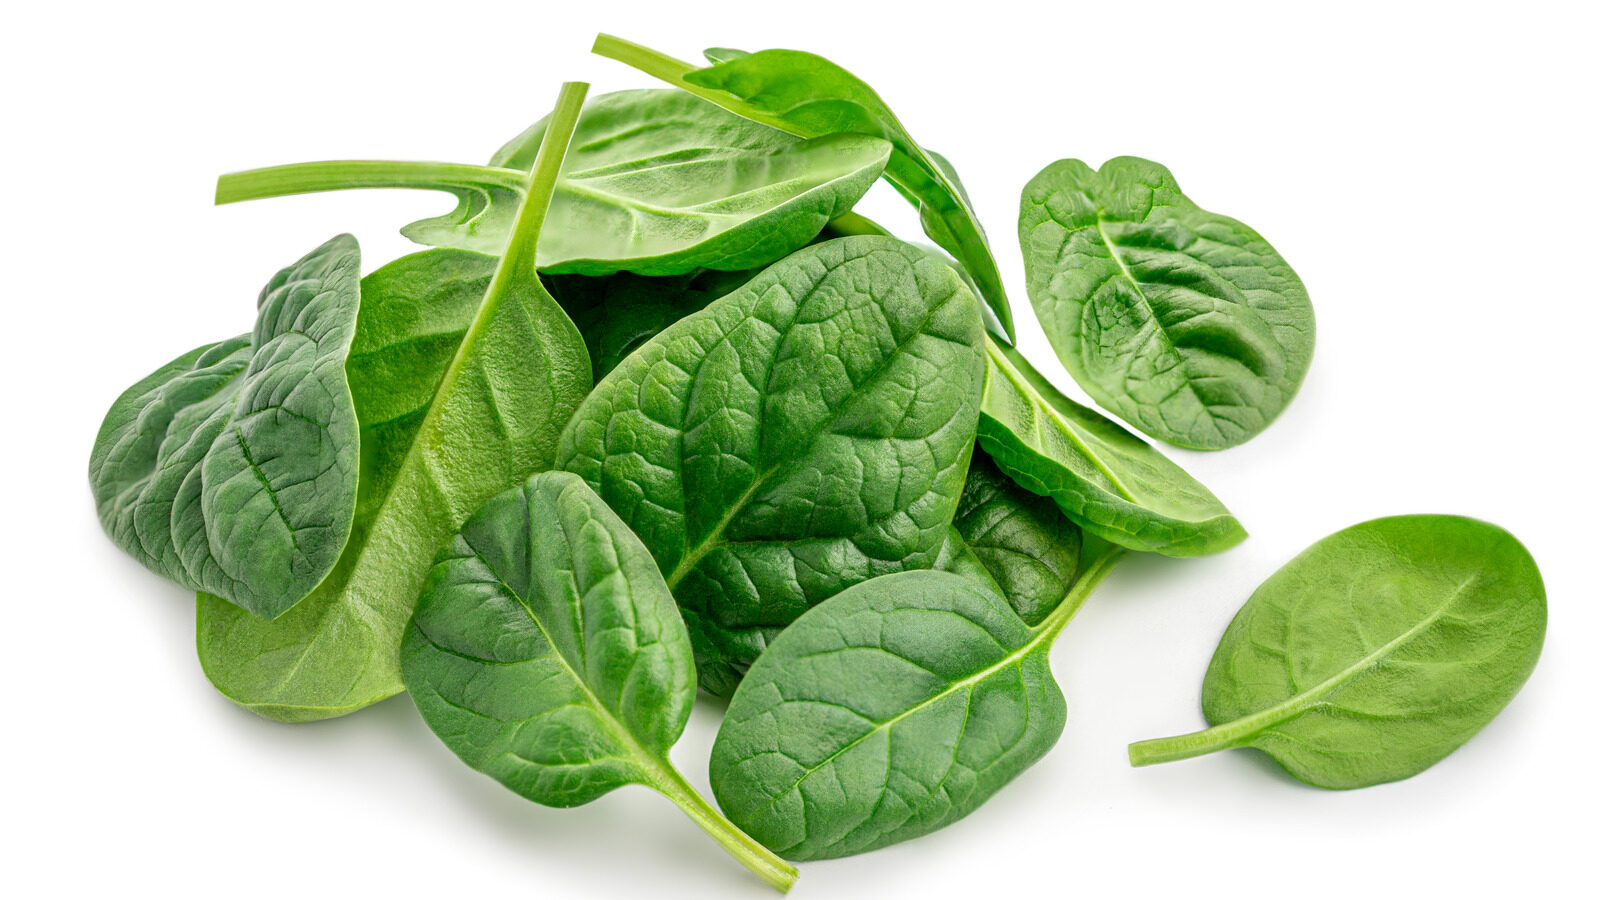 Pile,Of,Fresh,Green,Baby,Spinach,Leaves,Isolated,On,White